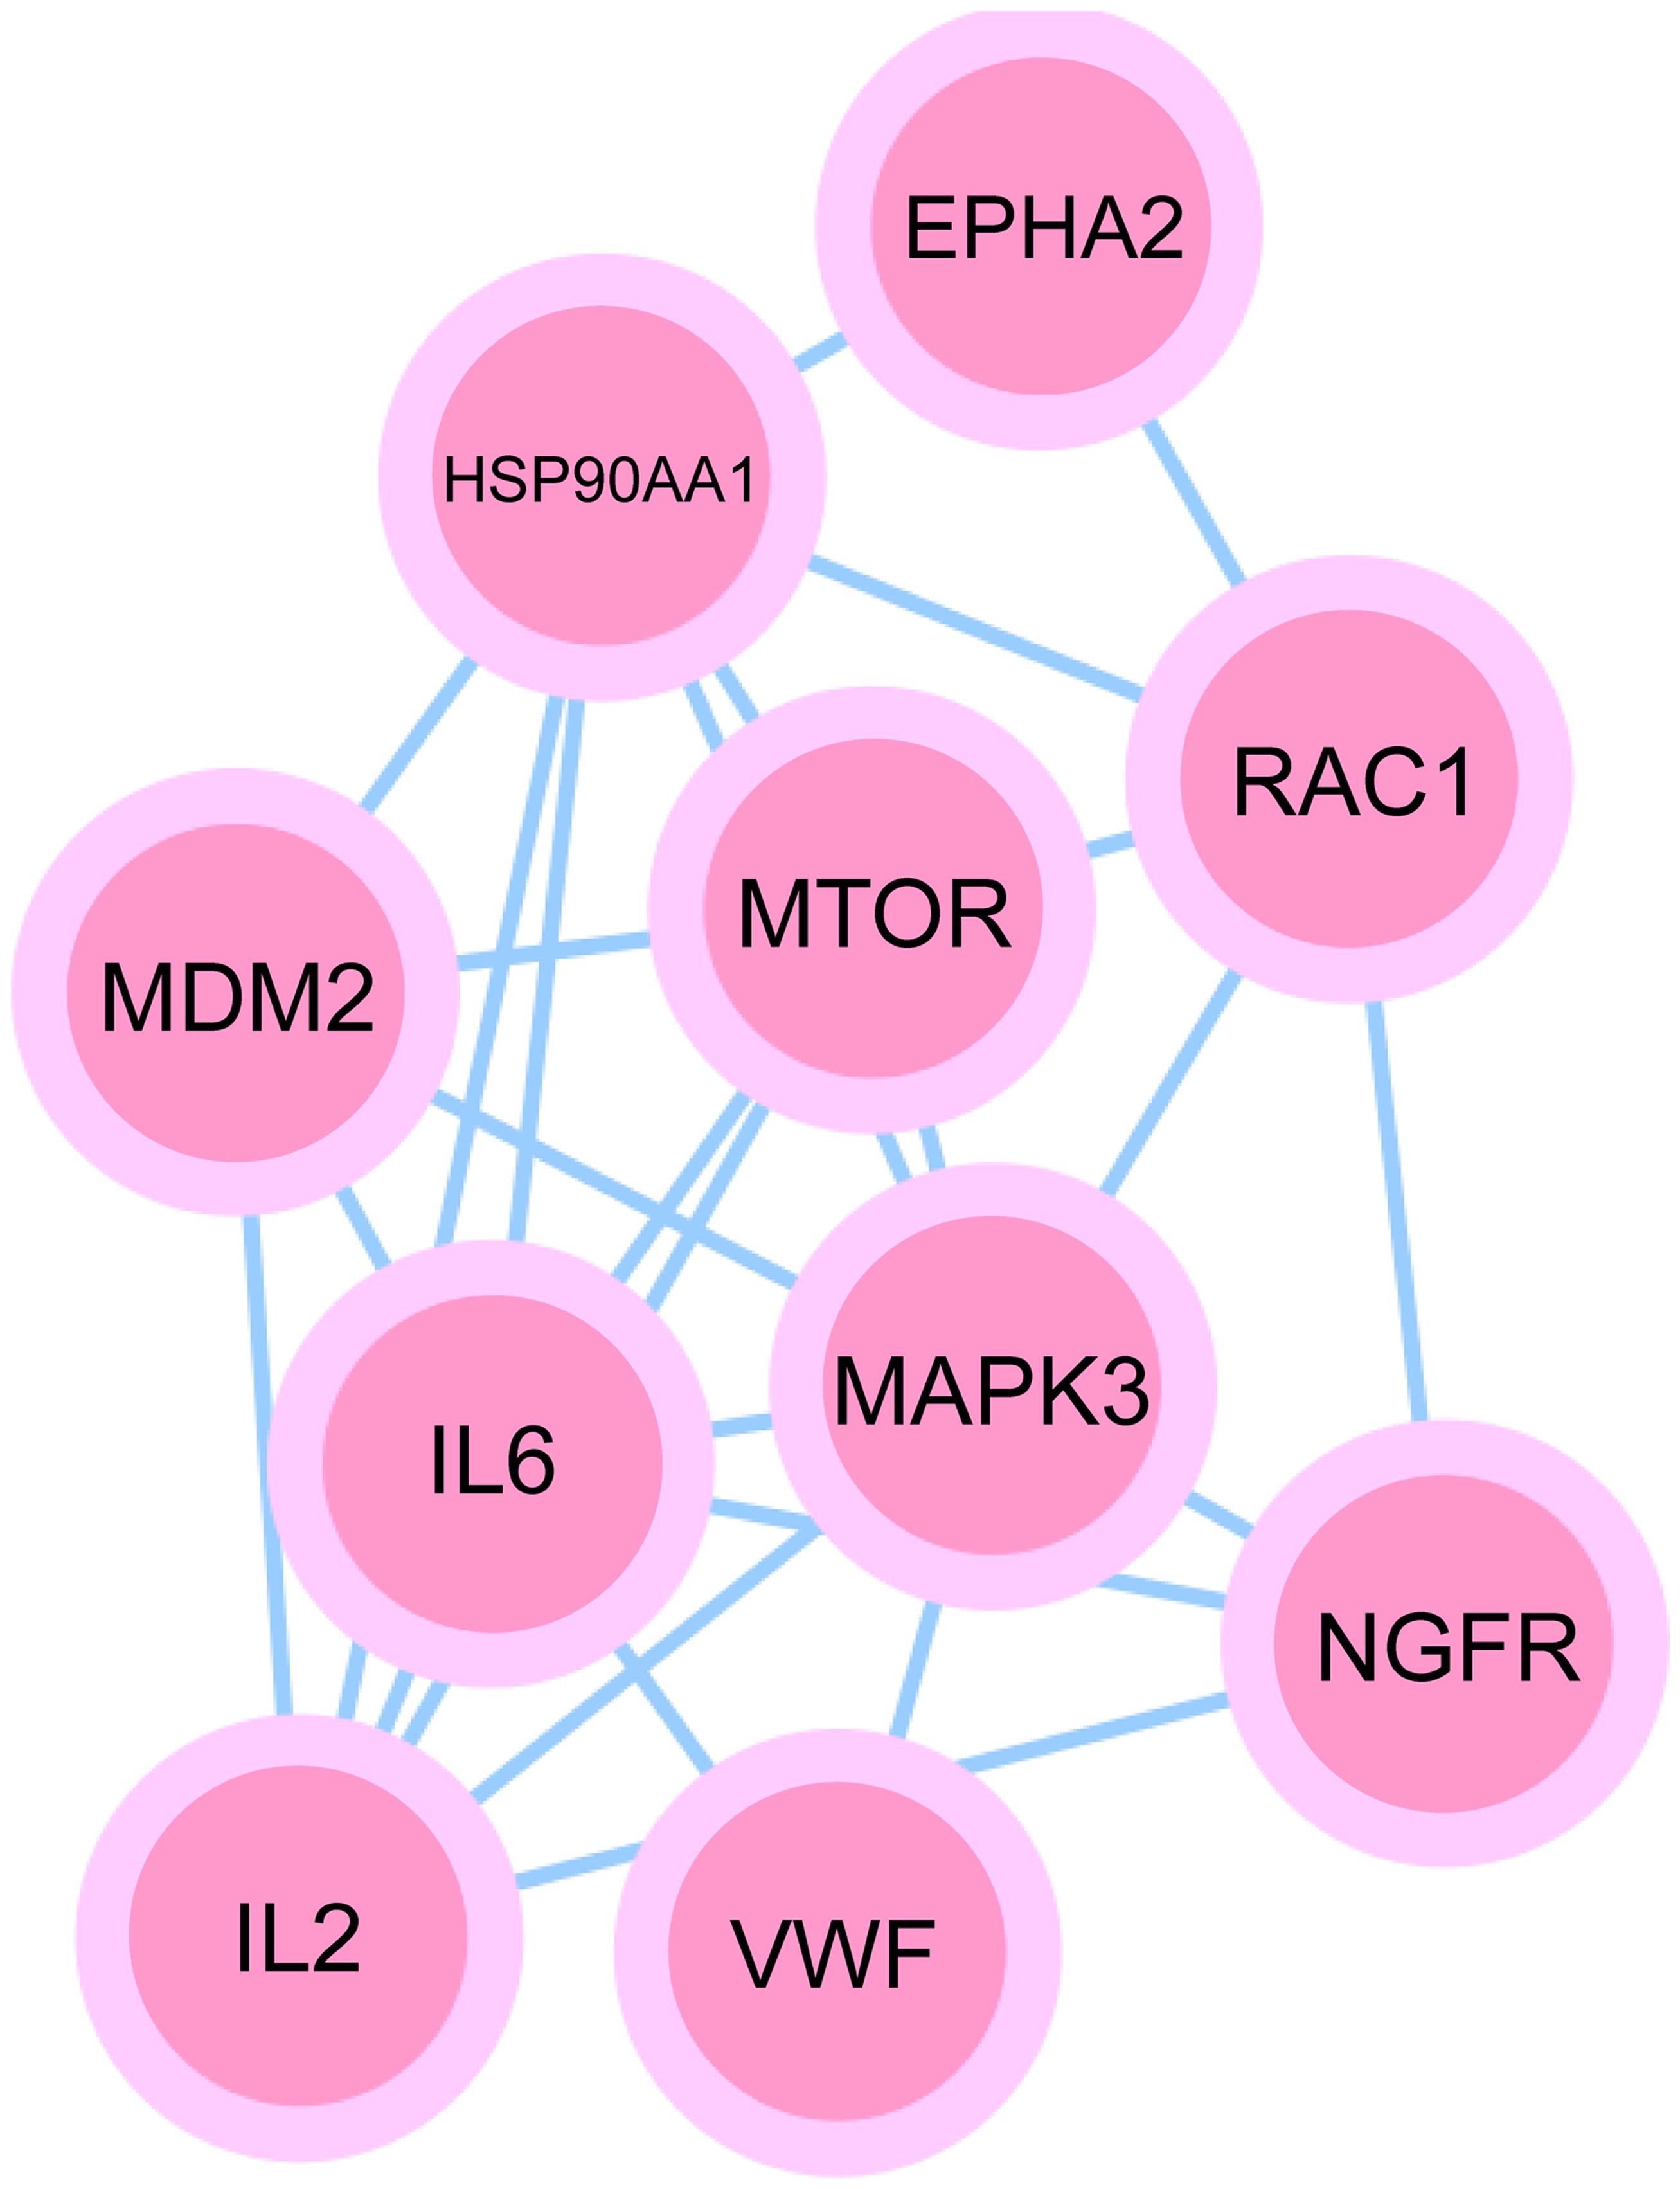 The PI3K-Akt pathway constructed via Cytoscape contains 10 target genes.